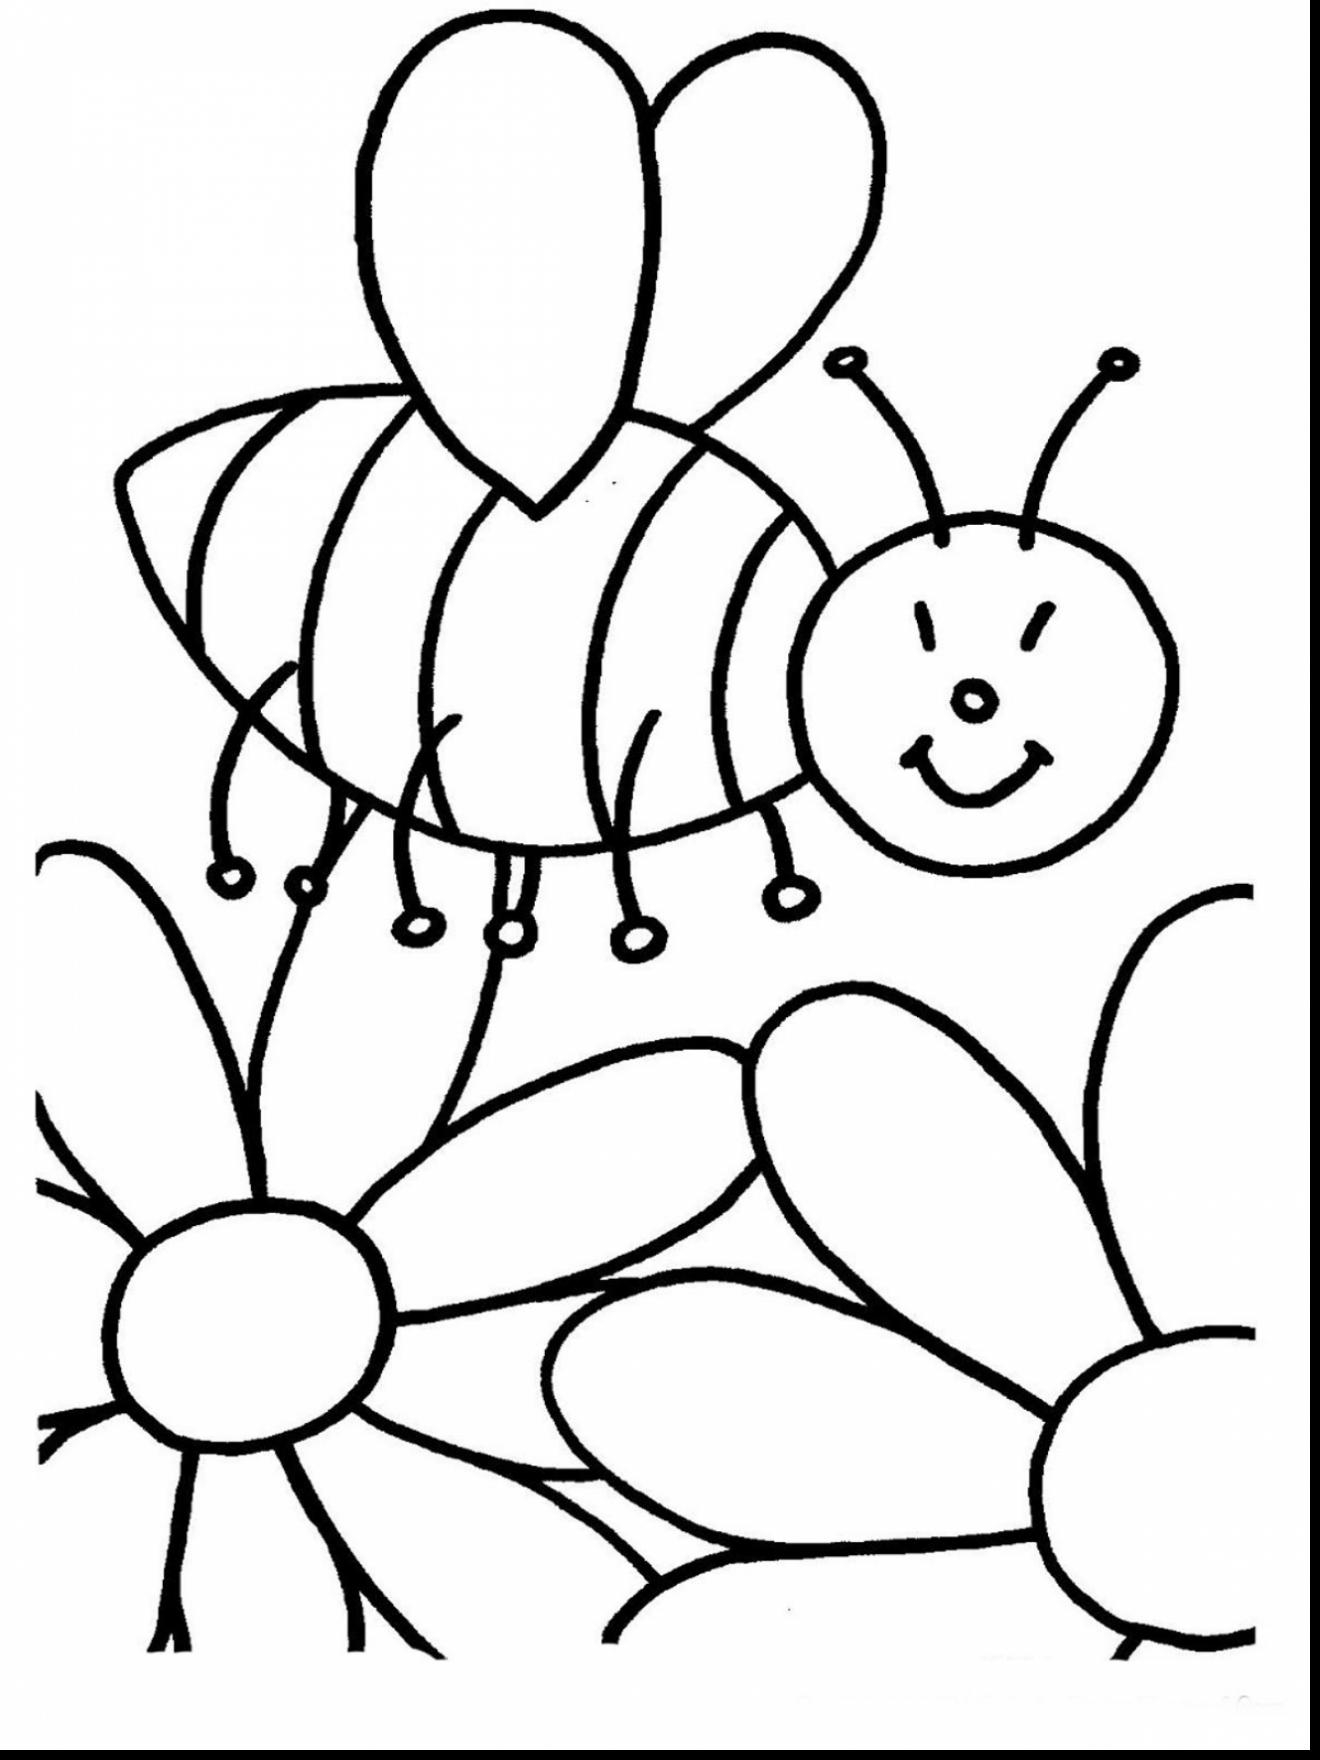 Flowers Coloring Pages Free Printable Coloring Pages Coloringes Free Flower For Kids At Getdrawings Com